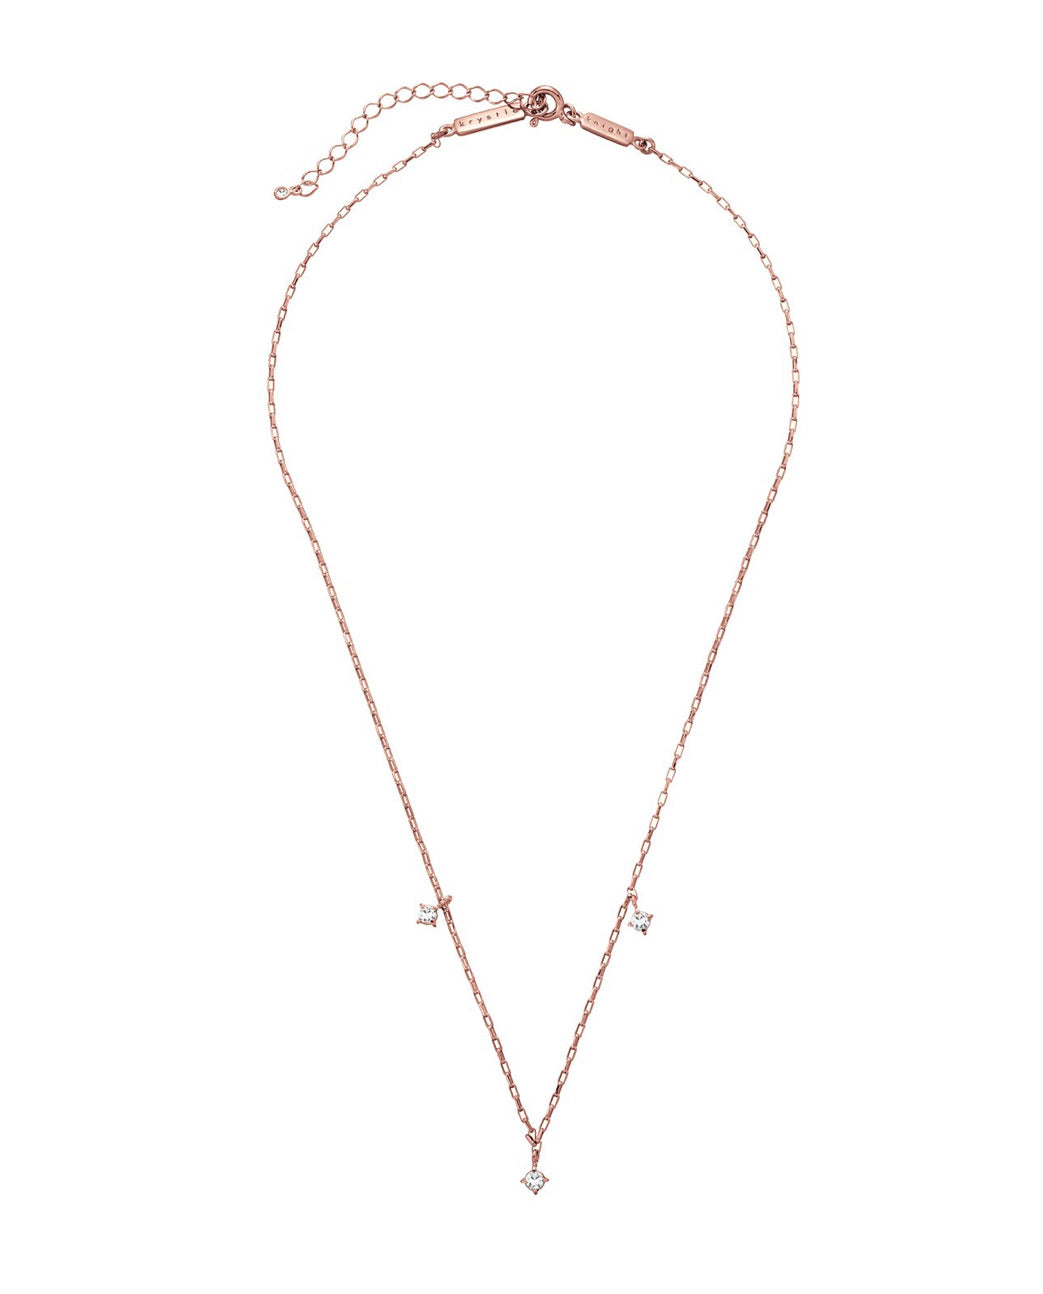 SHIMMERING PRECIOUS NECKLACE- ROSE GOLD- WHITE SAPPHIRE